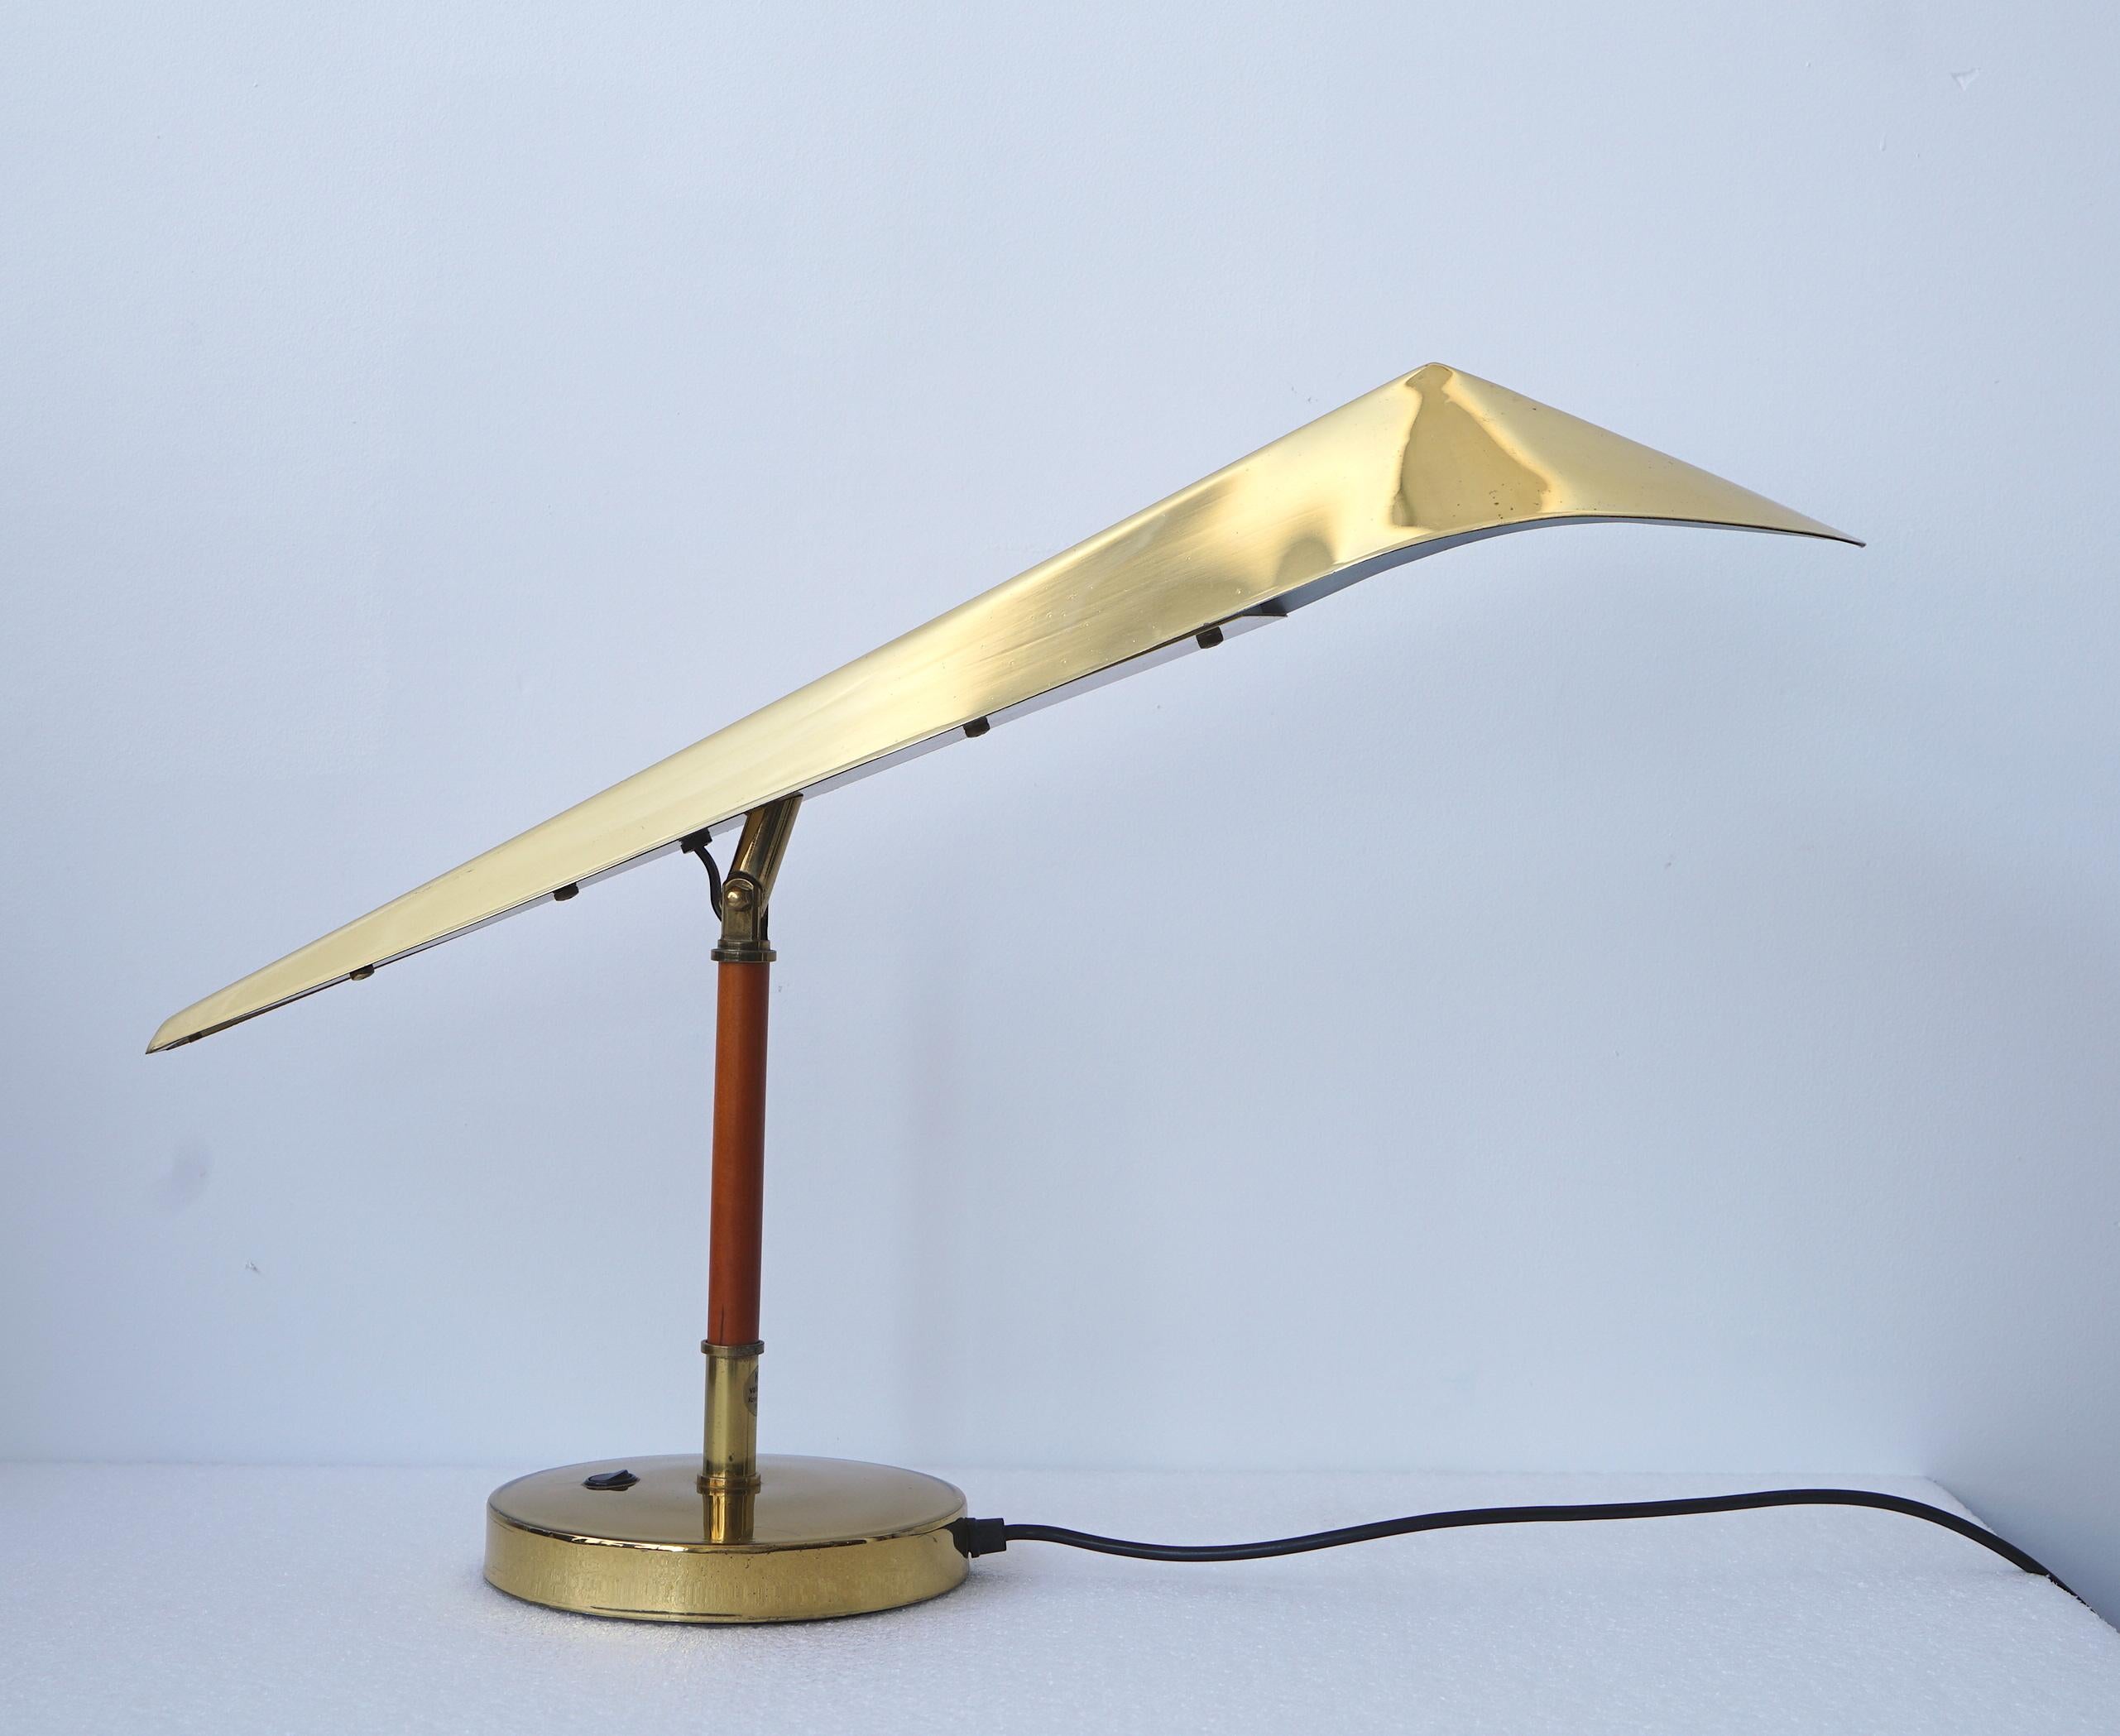 A Desk lamp, custom order produced by KT Valaistus ( Kone-Tukku Oy) for Hotel Lappee Lappeenrata, Finland. Circa 1980th.
Adjustable lamps head made of polished brass mount on teak stem. Manufacturer label attached.
Existing Europeans wires,